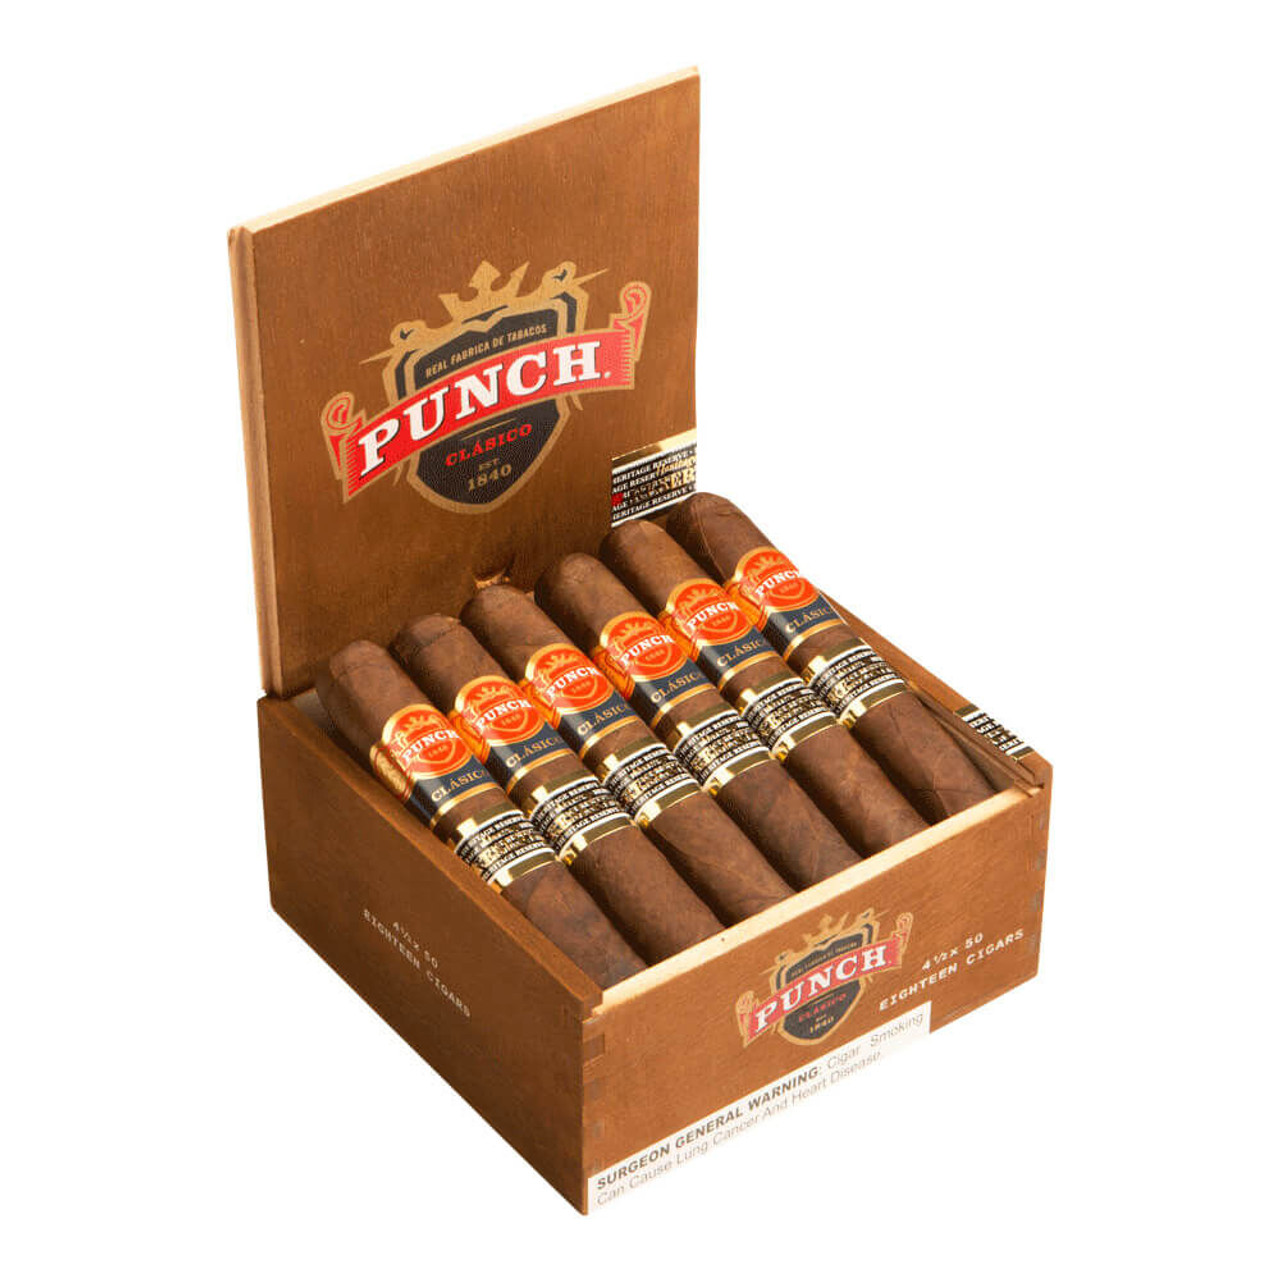 Punch Heritage Reserve Rothschilde Cigars - 4.5 x 50 (Box of 18)